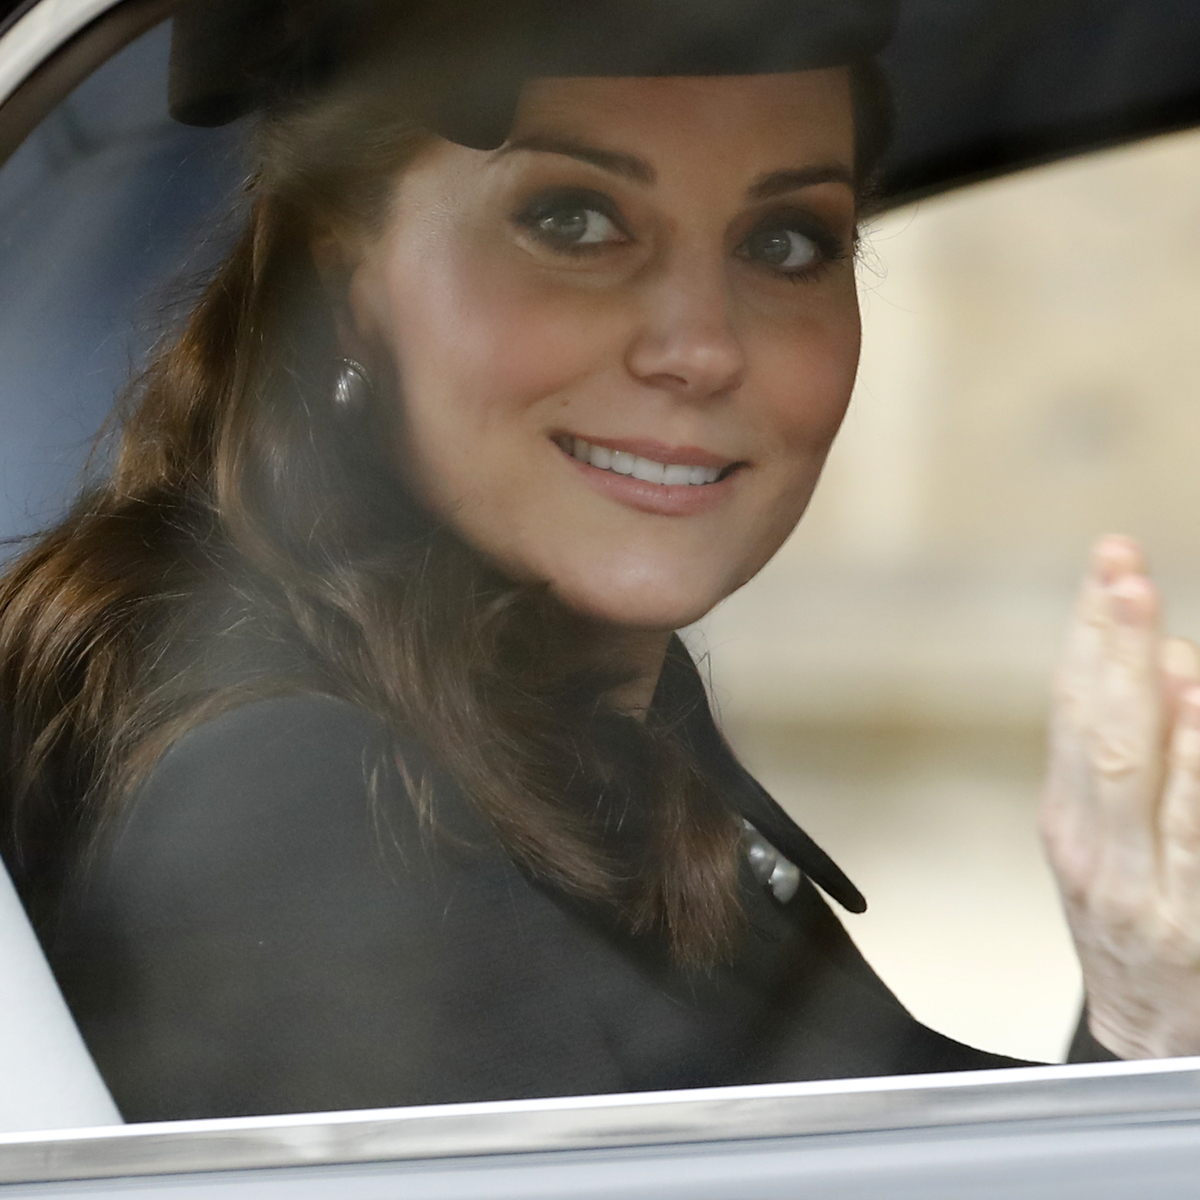 Image for article Kate Middleton Photographer Shares Details Behind Car Outing With Prince William  E! Online  E! NEWS